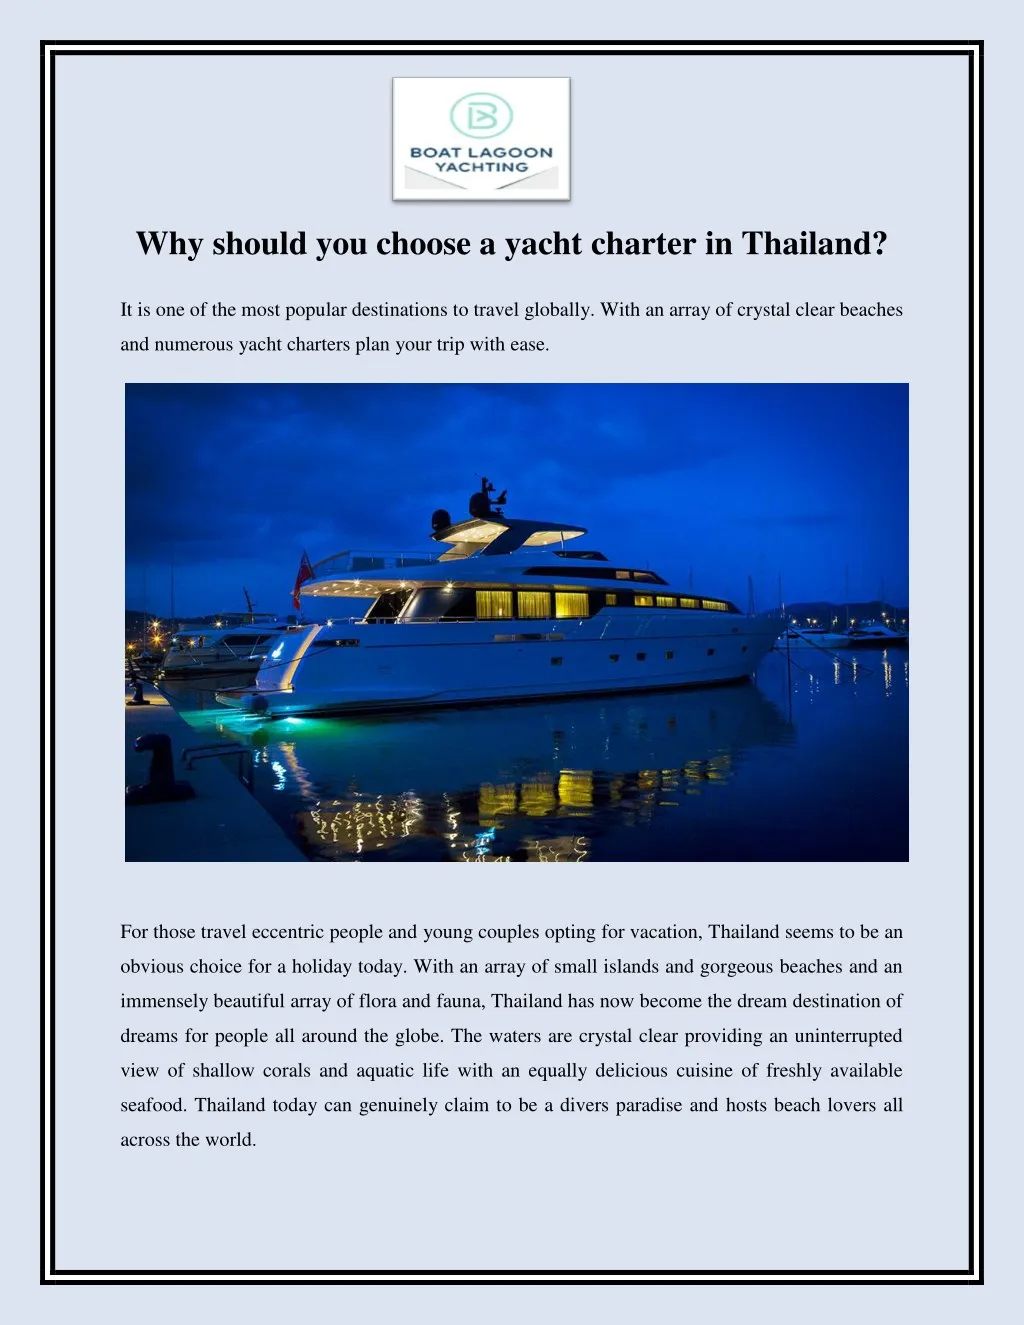 why should you choose a yacht charter in thailand